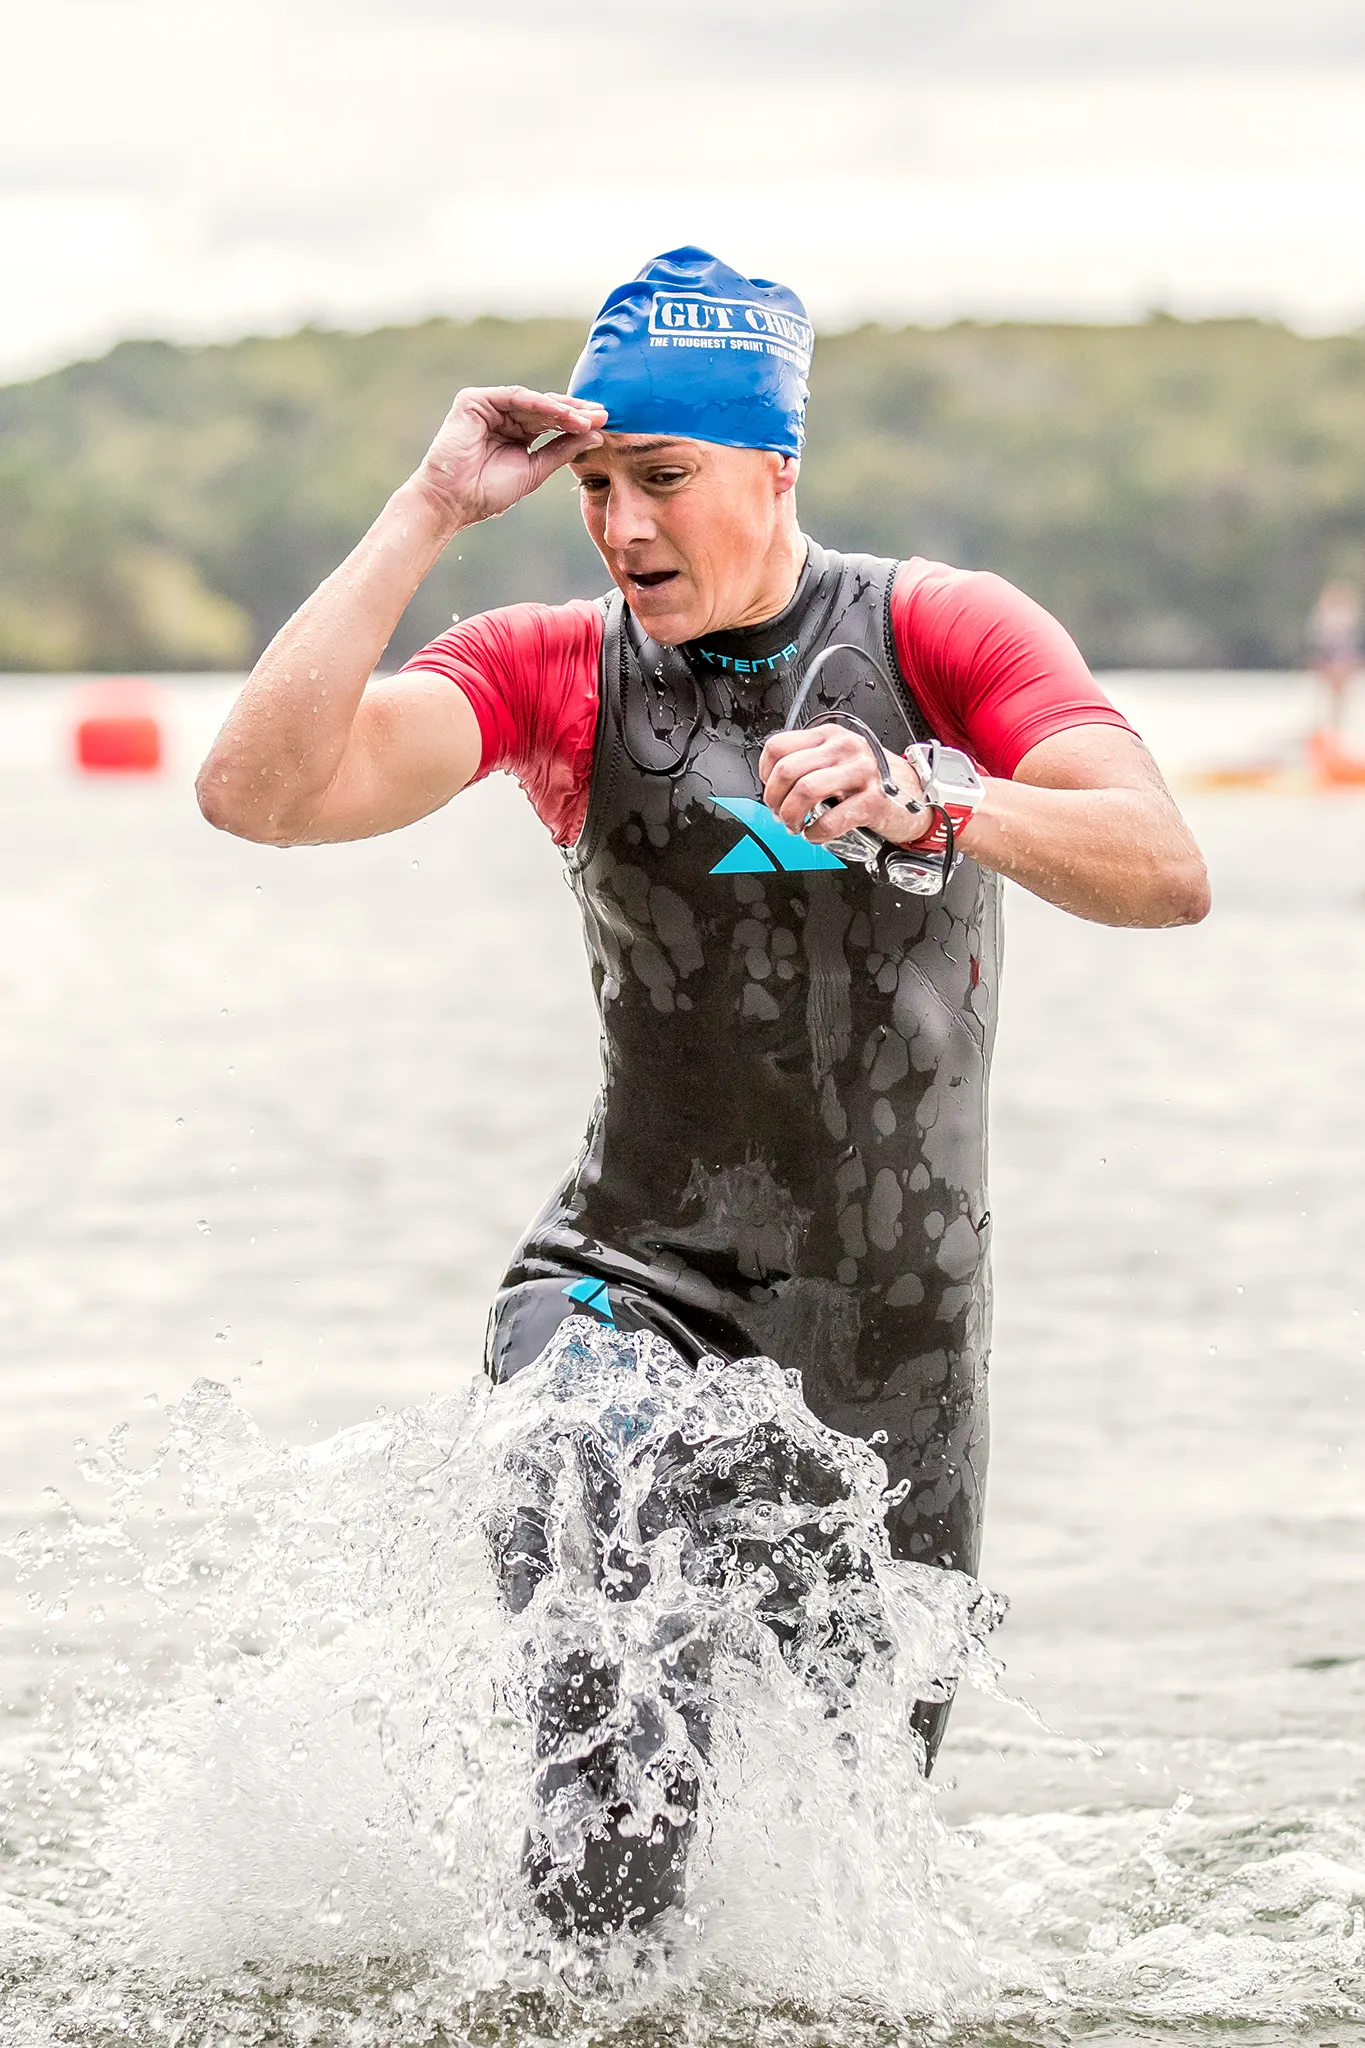 SwimRun competitor exiting the water